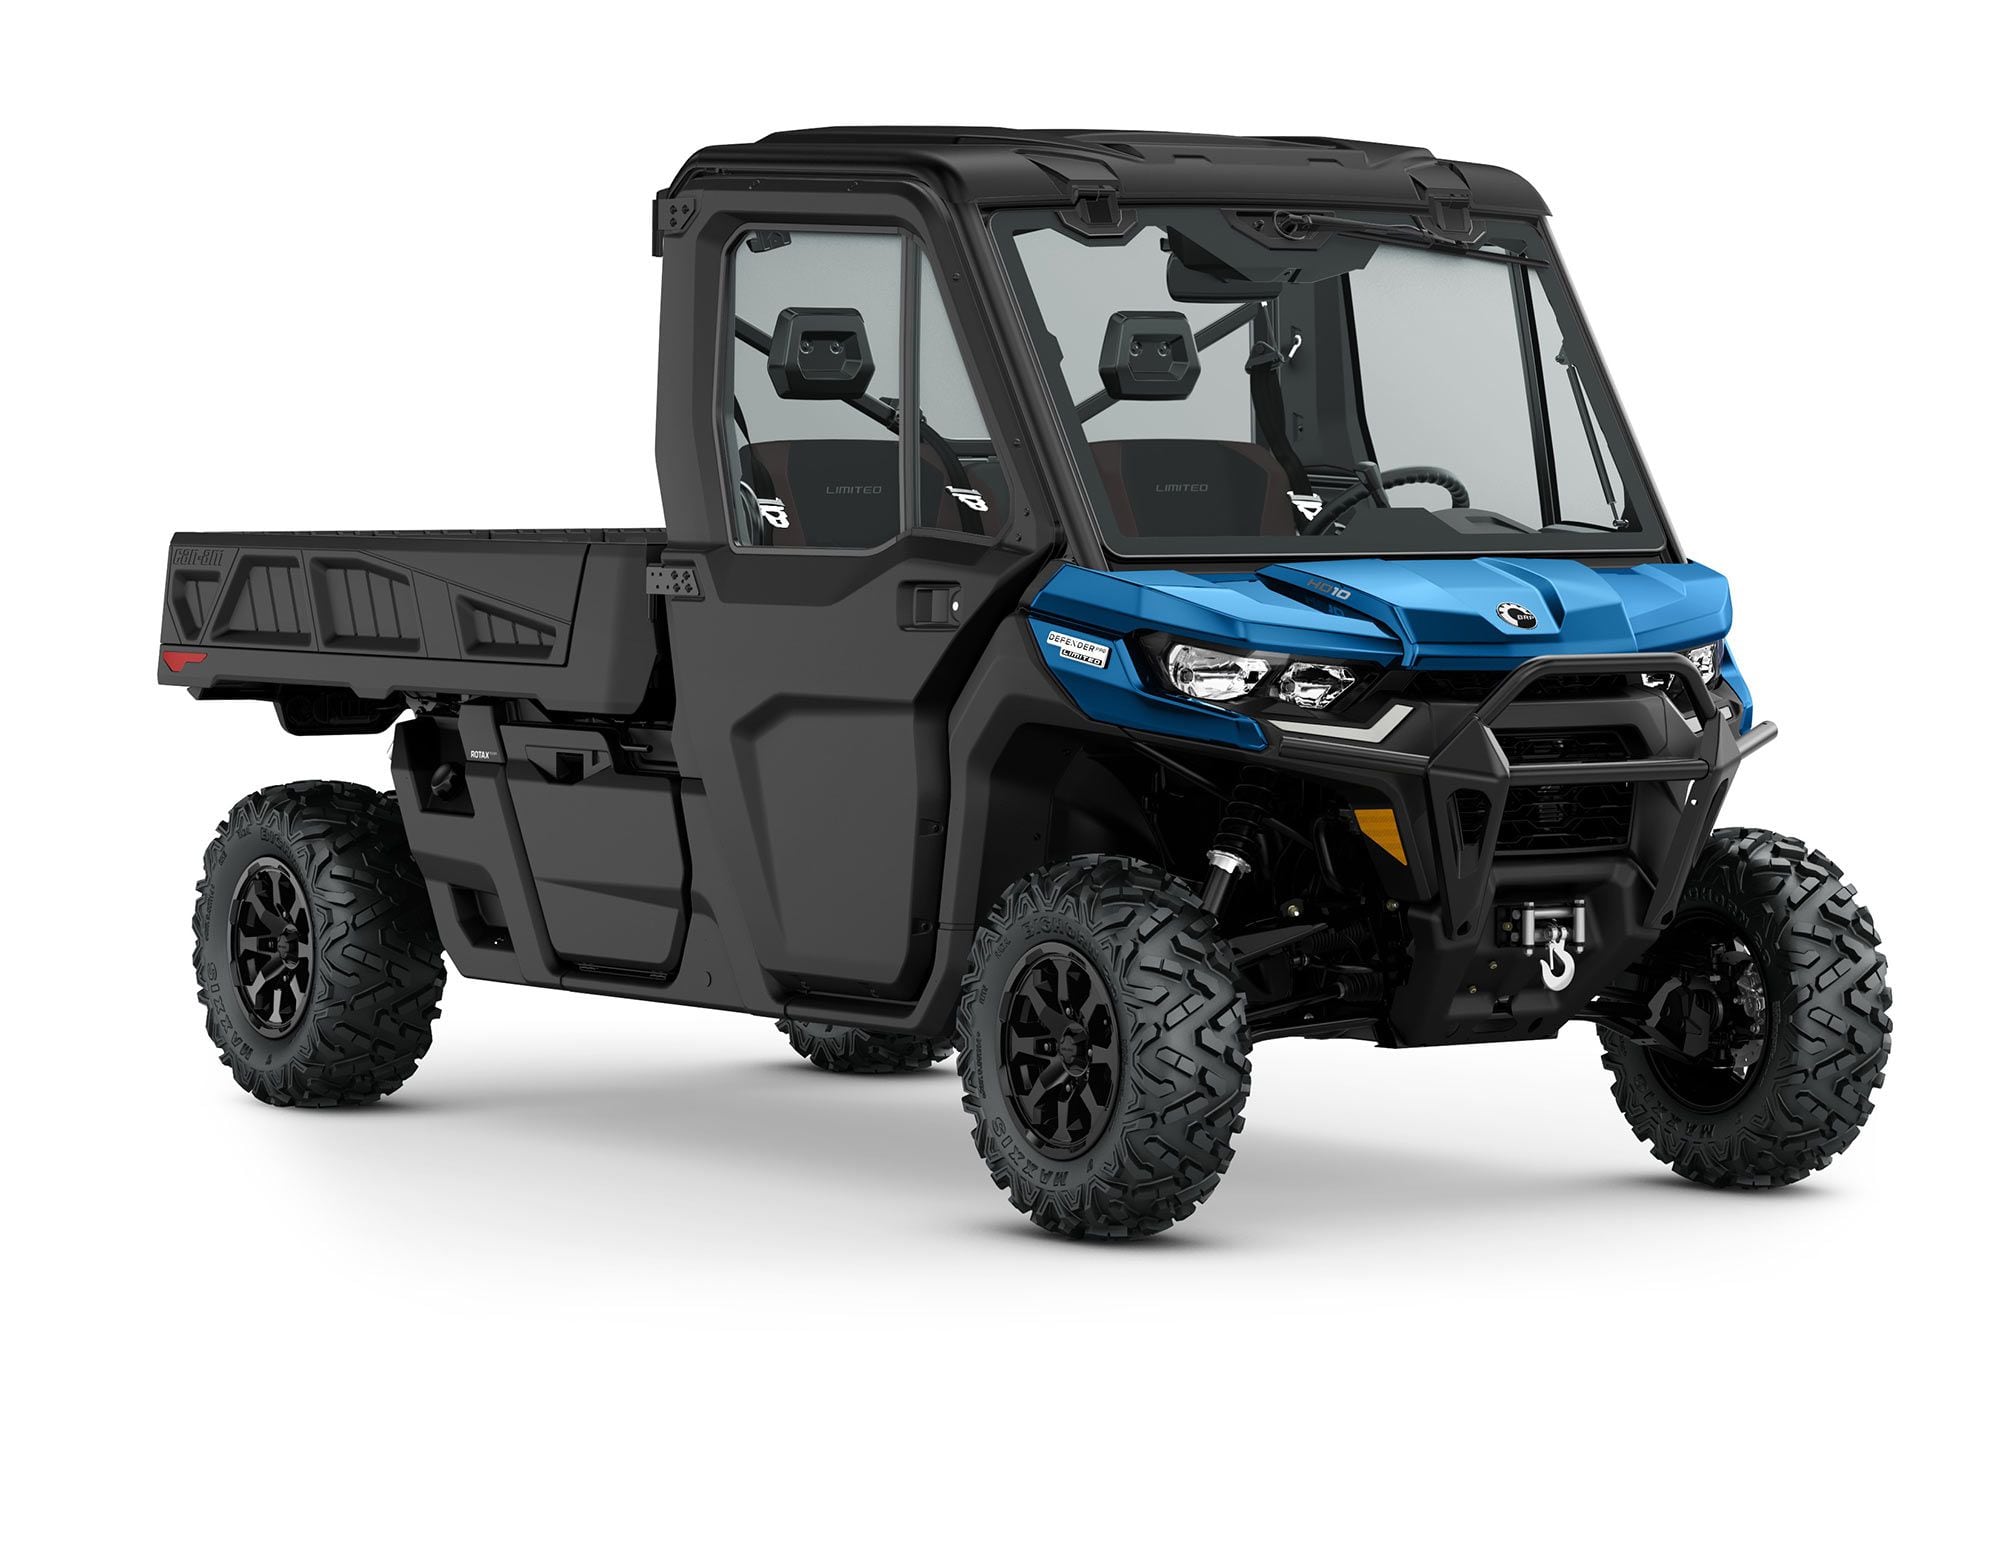 2022 Can-Am Defender Pro Limited front view in Oxford Blue.